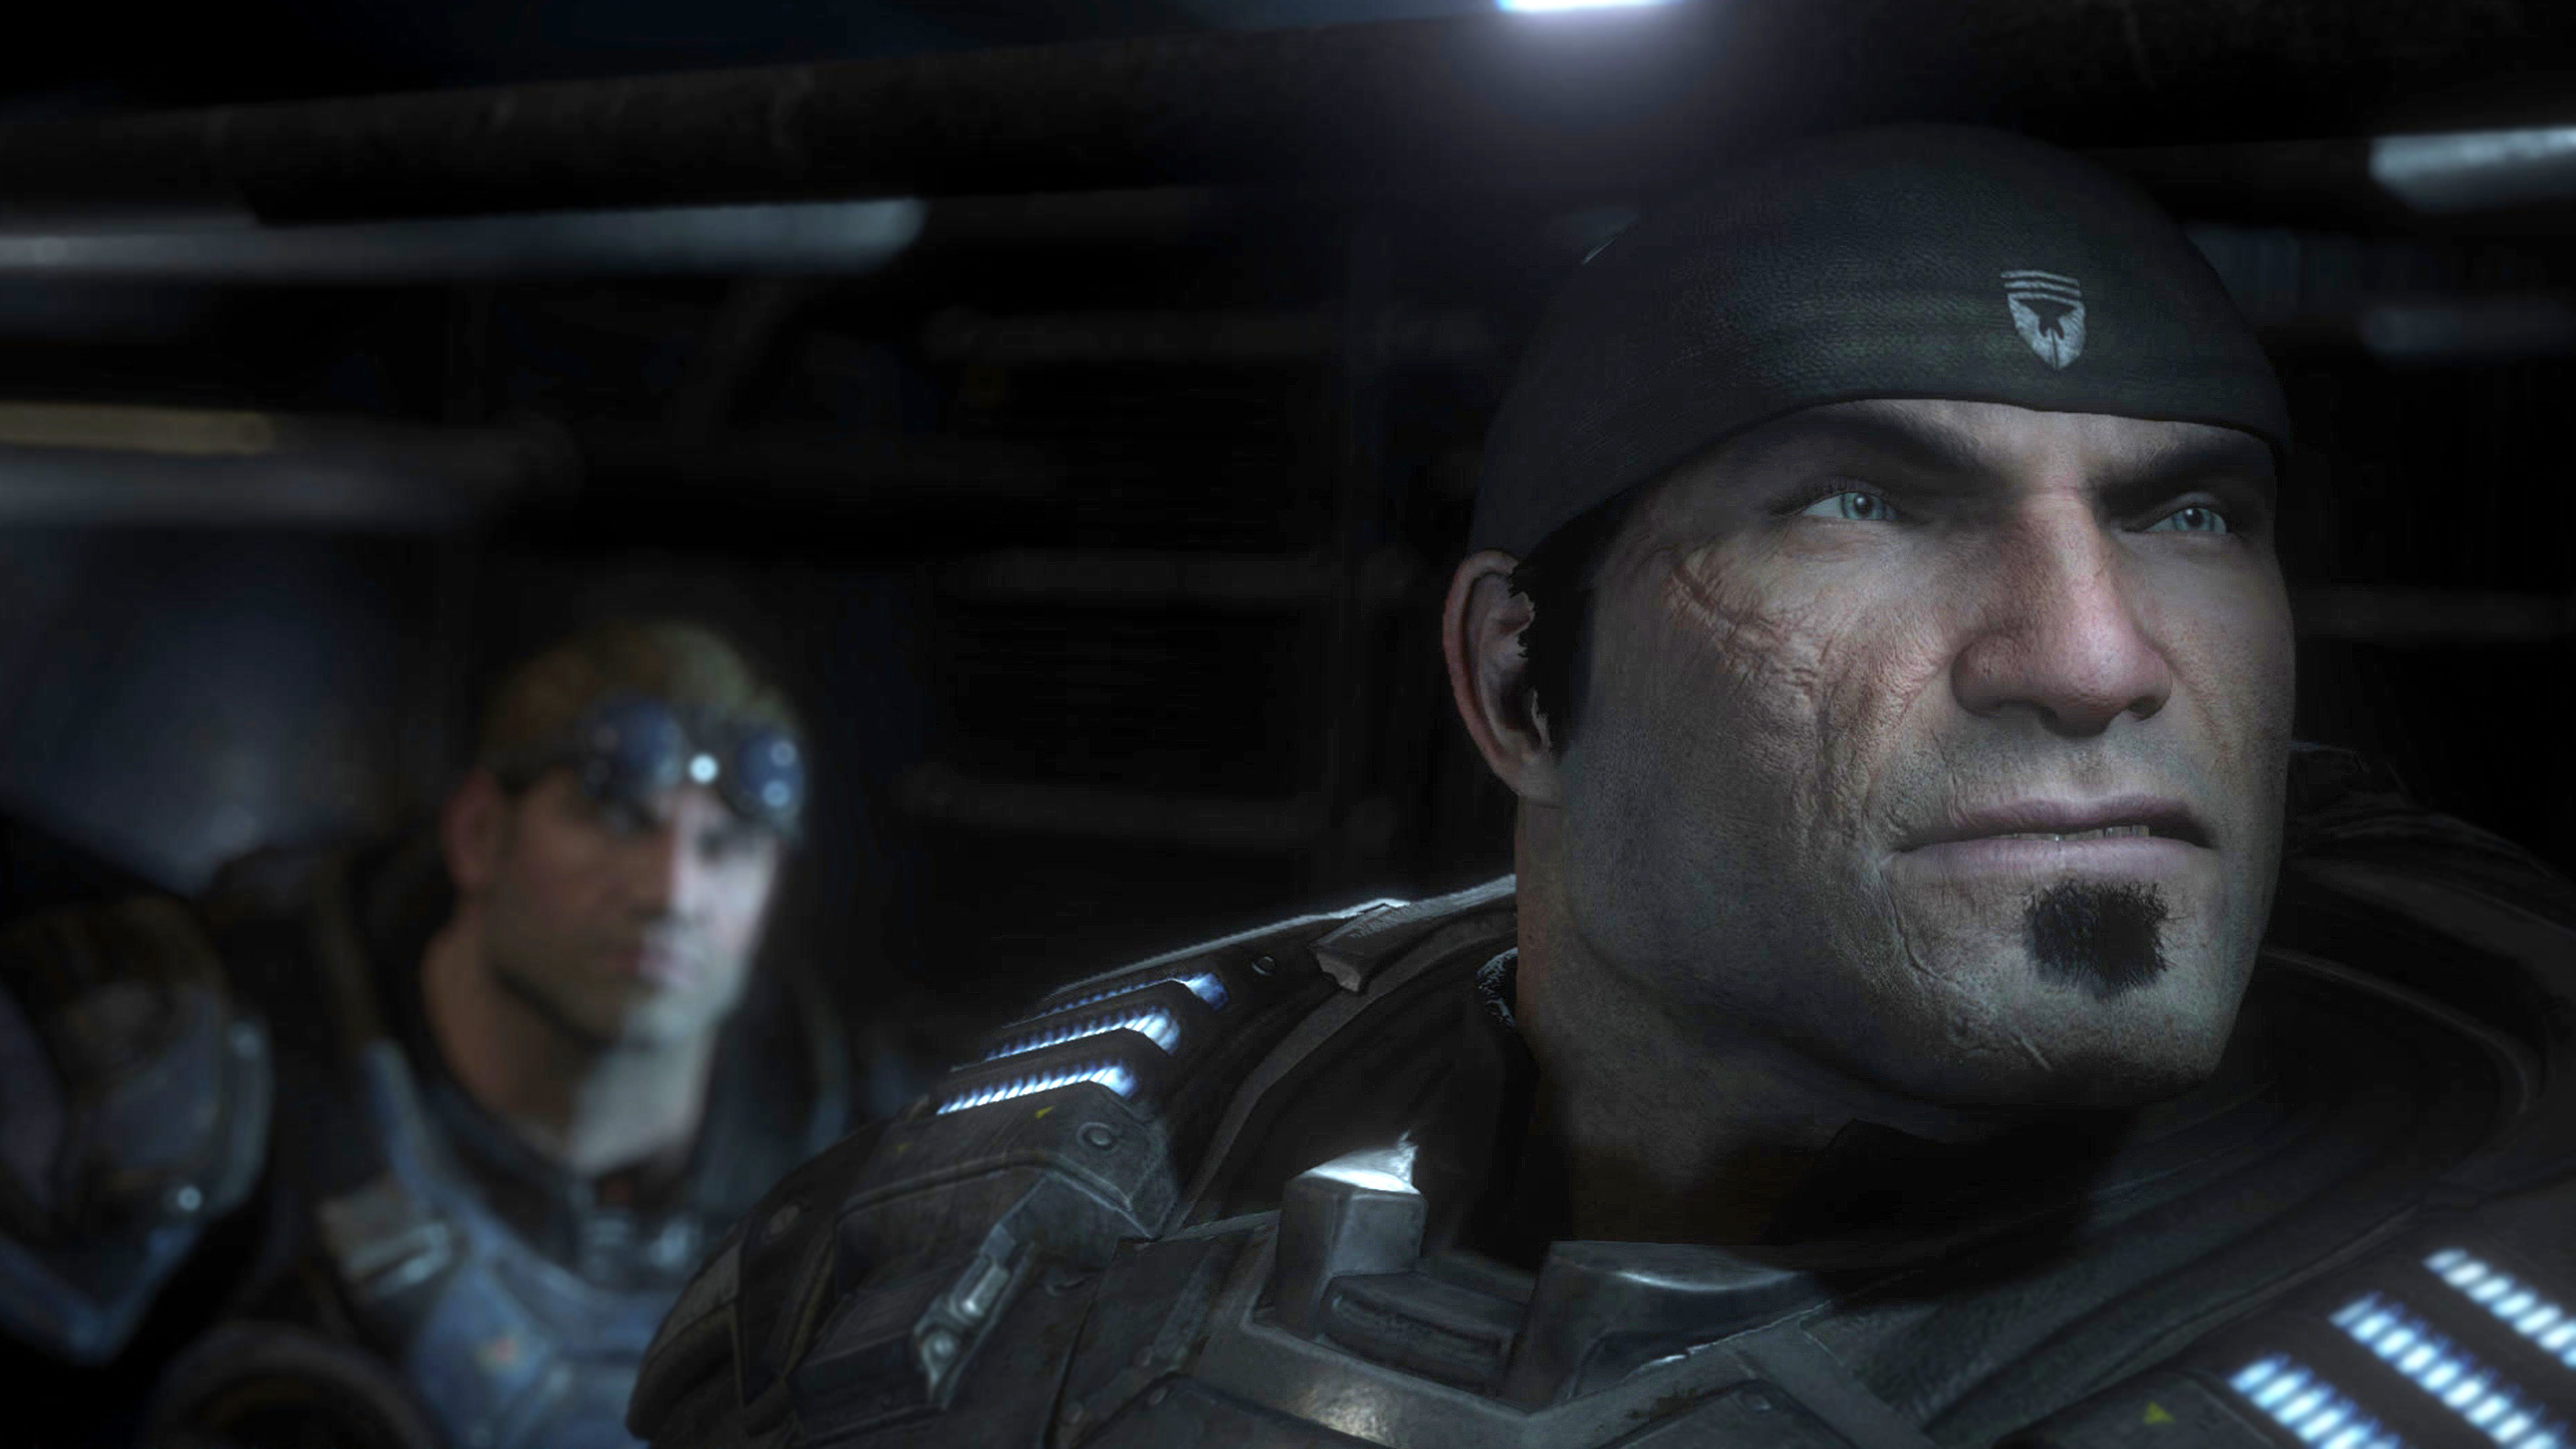 gears of war 4 download size on xbox one